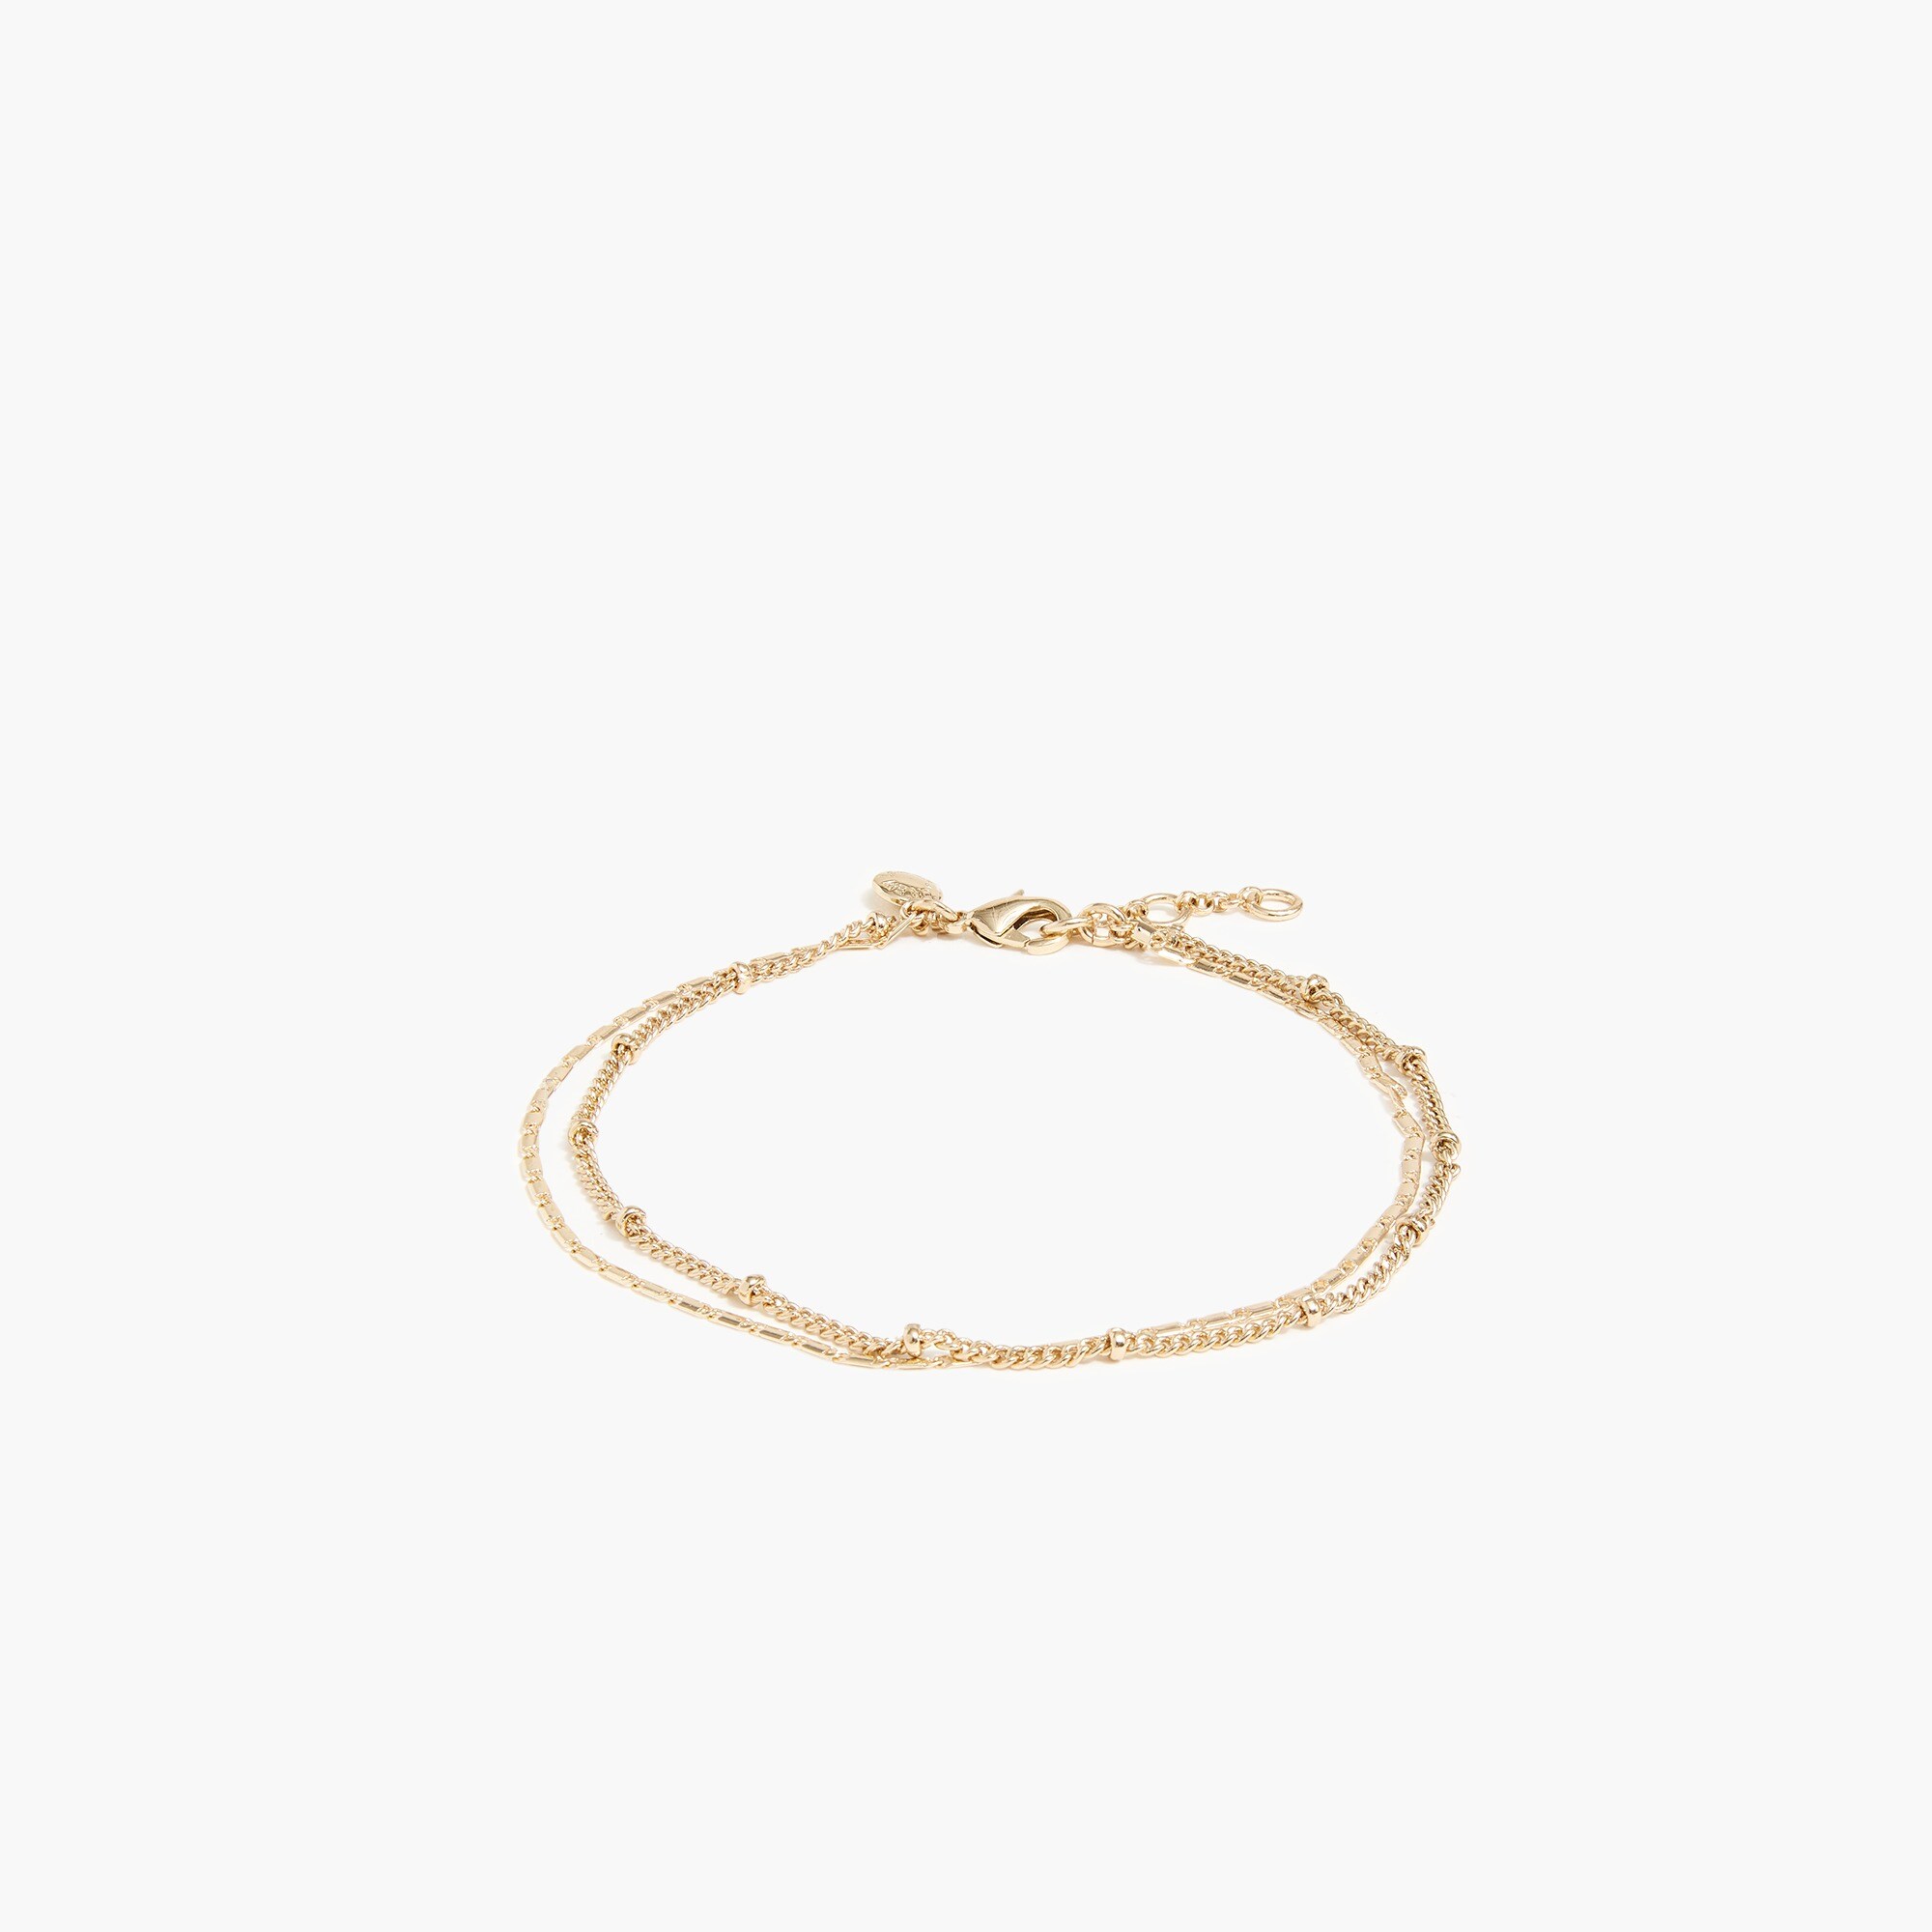  Gold layered anklet